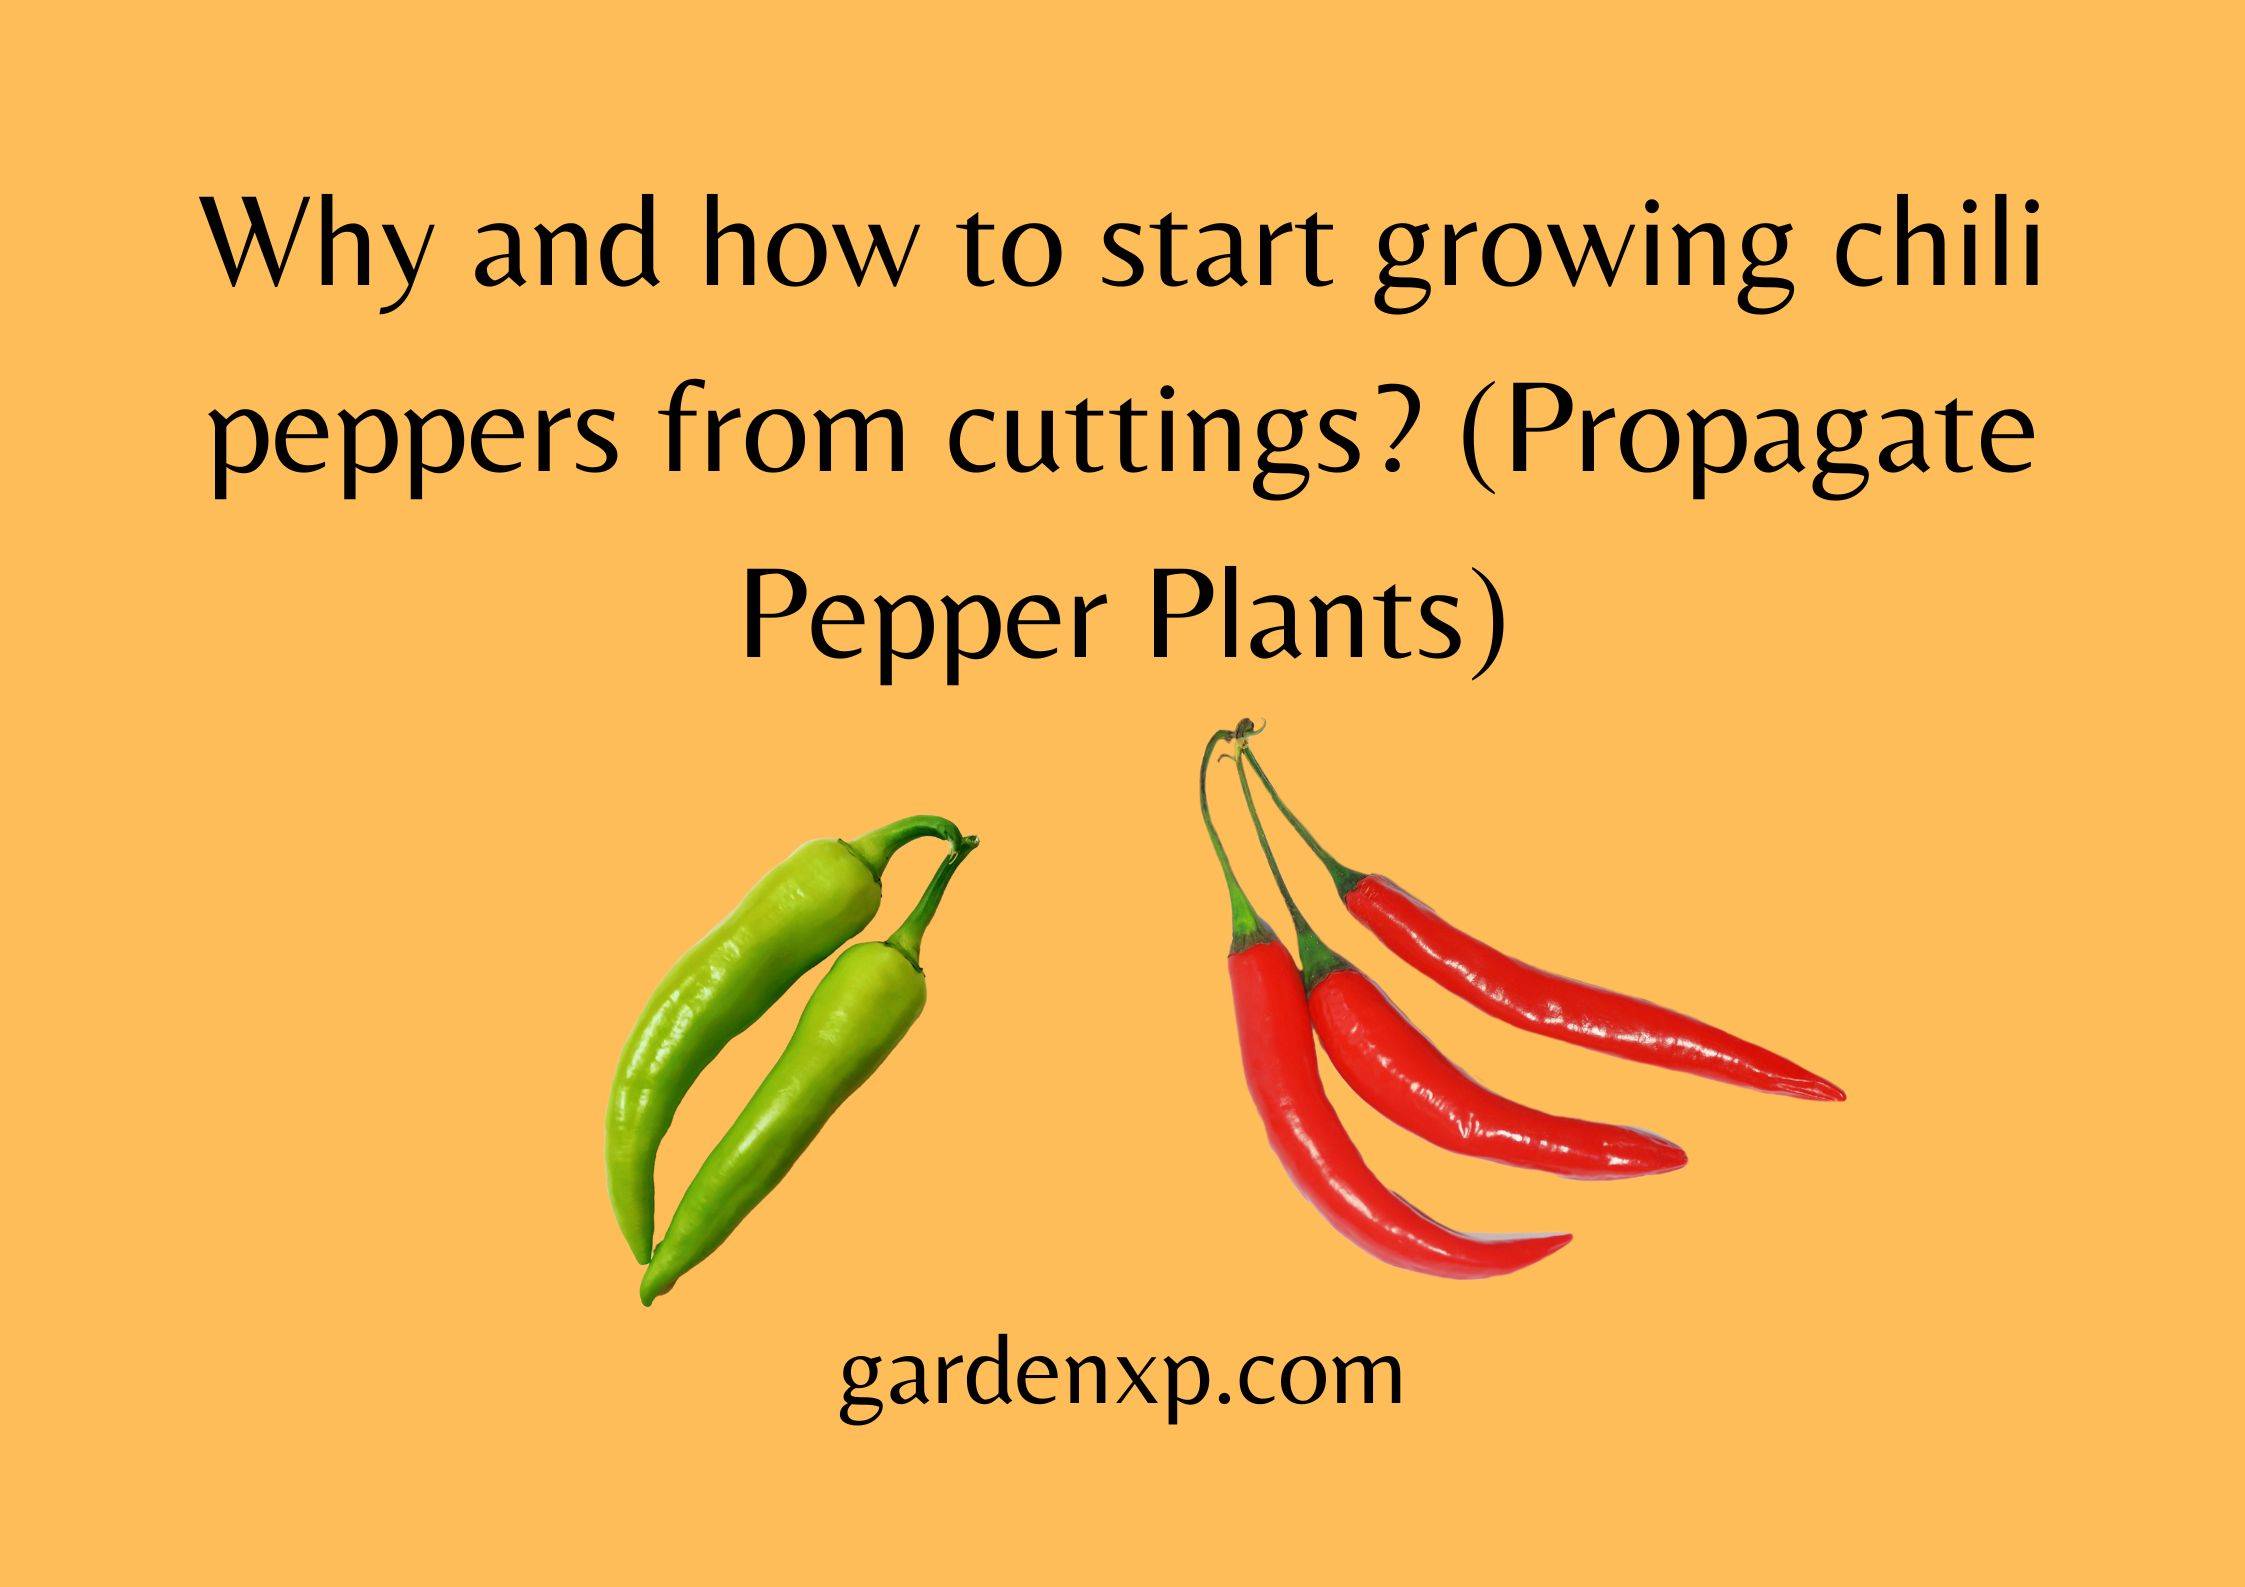 Why and how to start growing chili peppers from cuttings? (Propagate Pepper Plants)